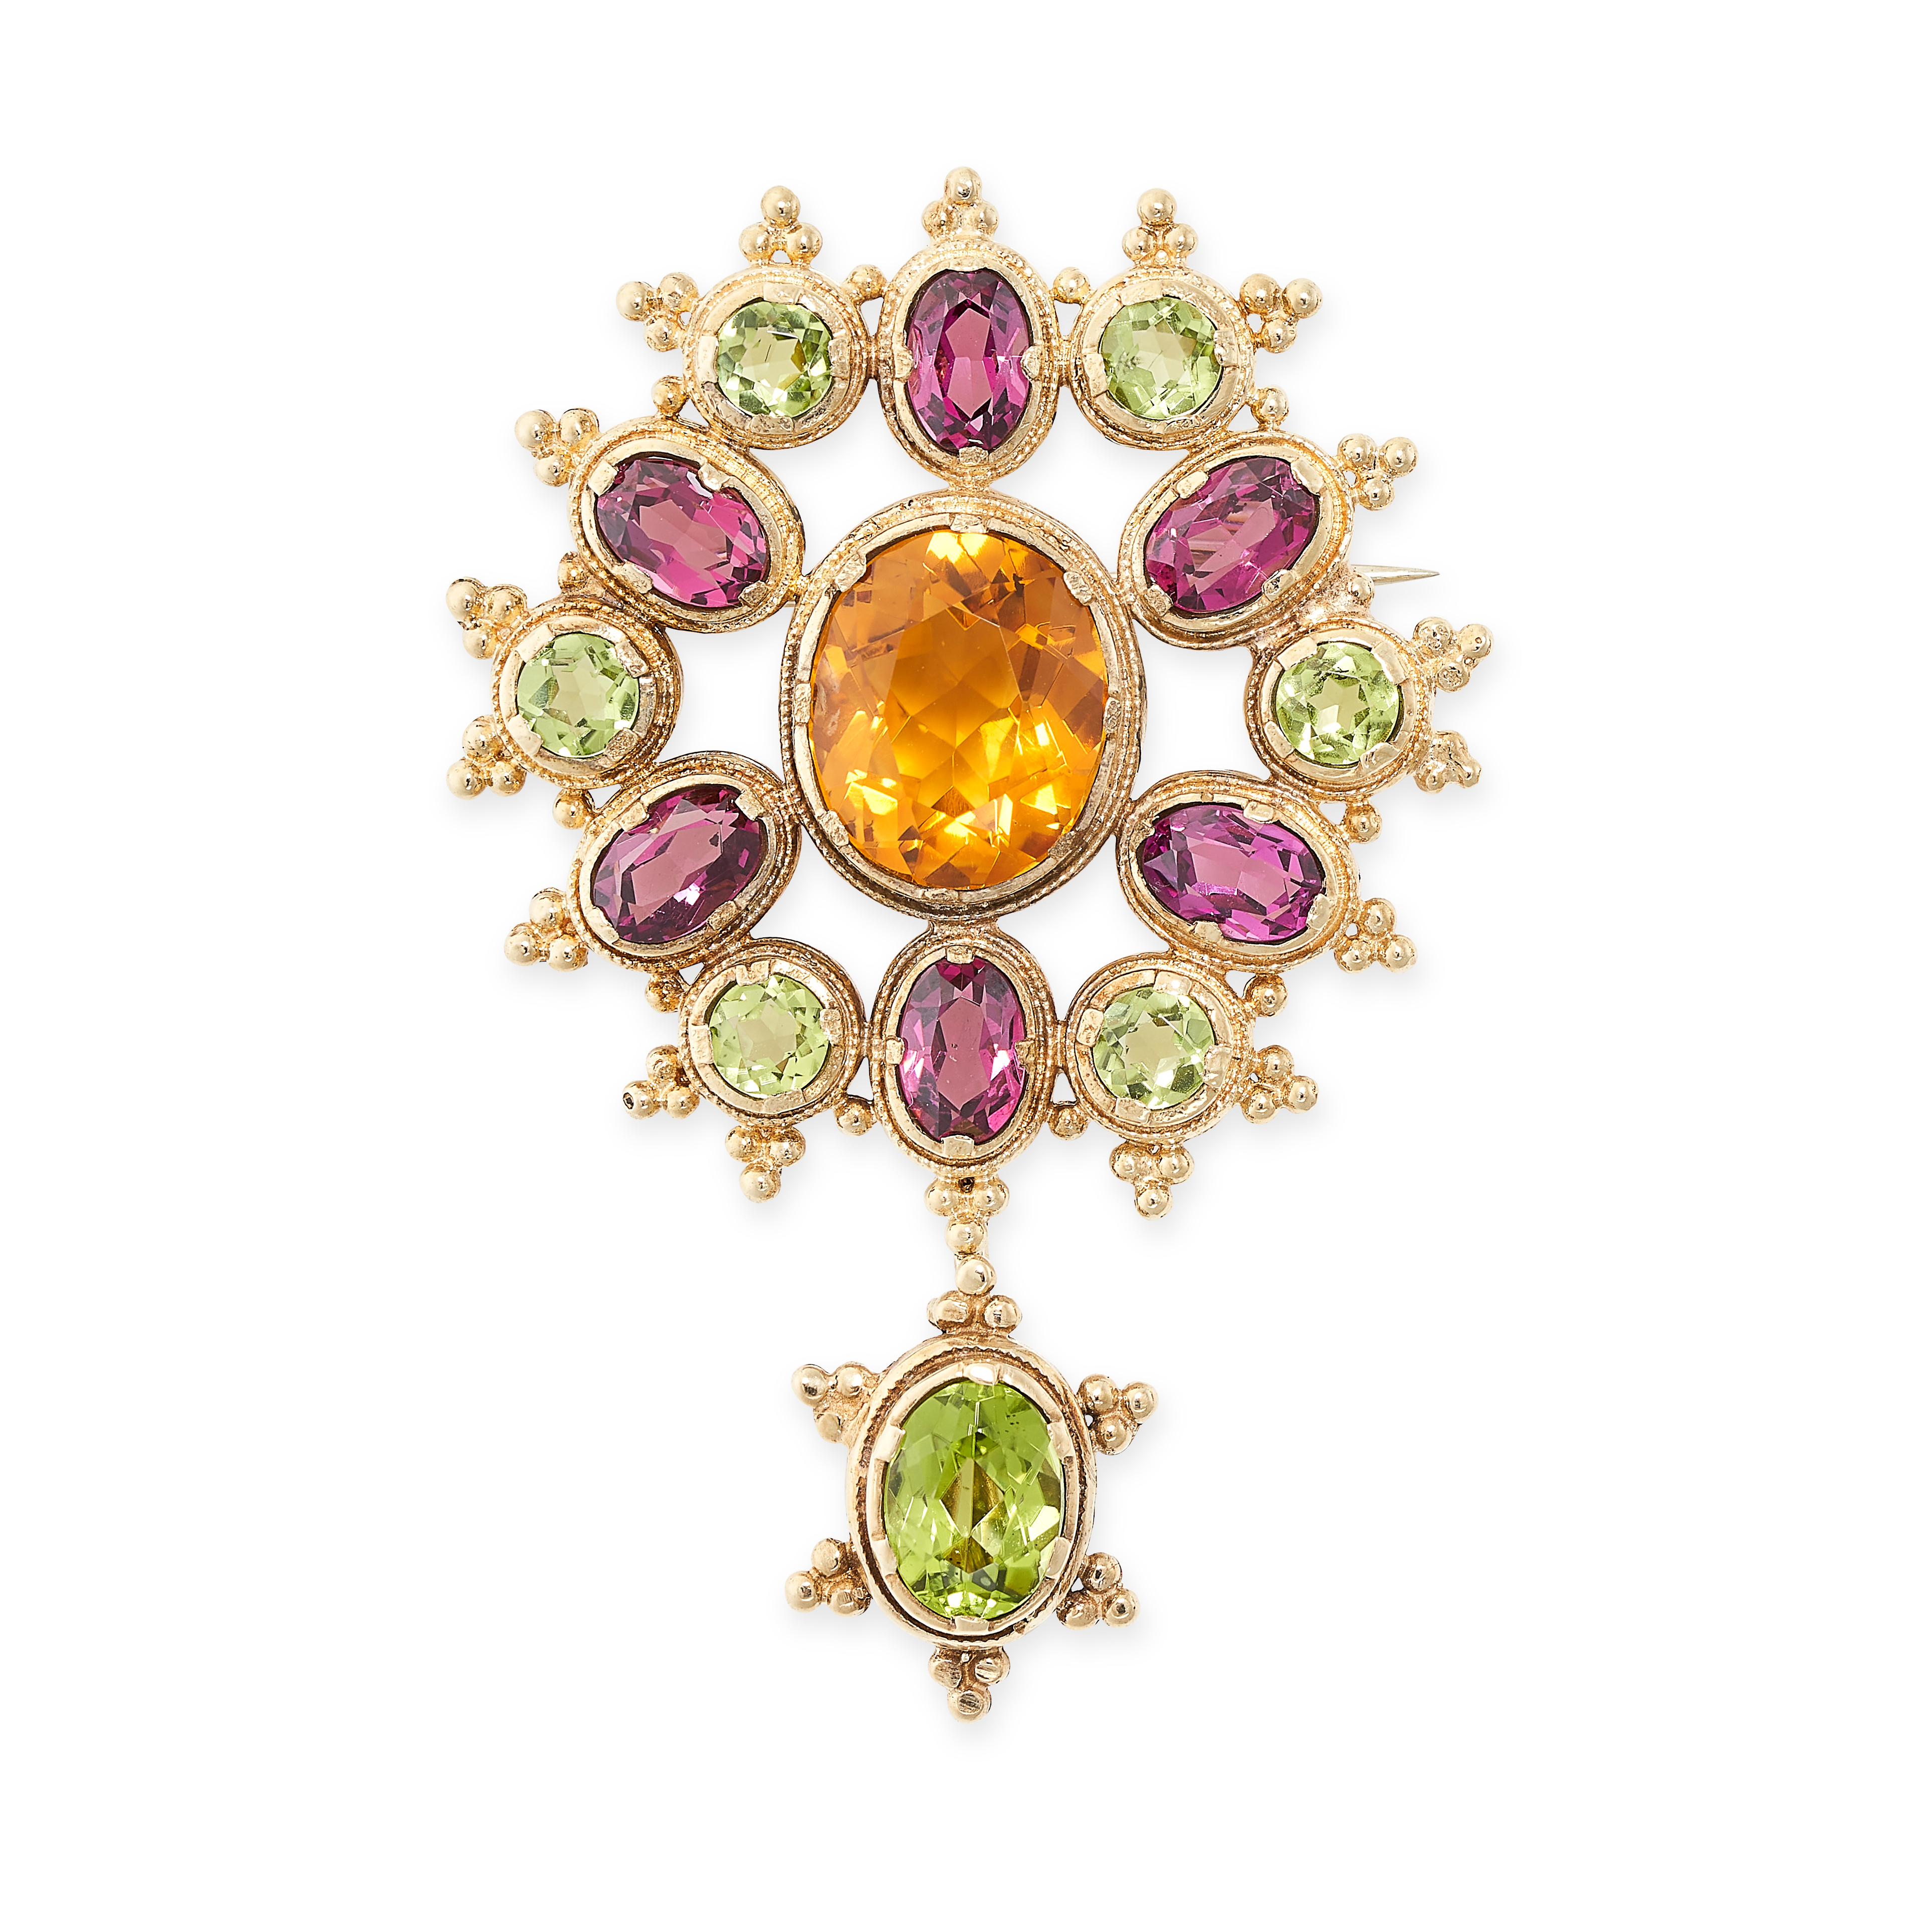 AN ANTIQUE ZIRCON, PERIDOT AND GARNET BROOCH / PENDANT in yellow gold, set with a central oval cut